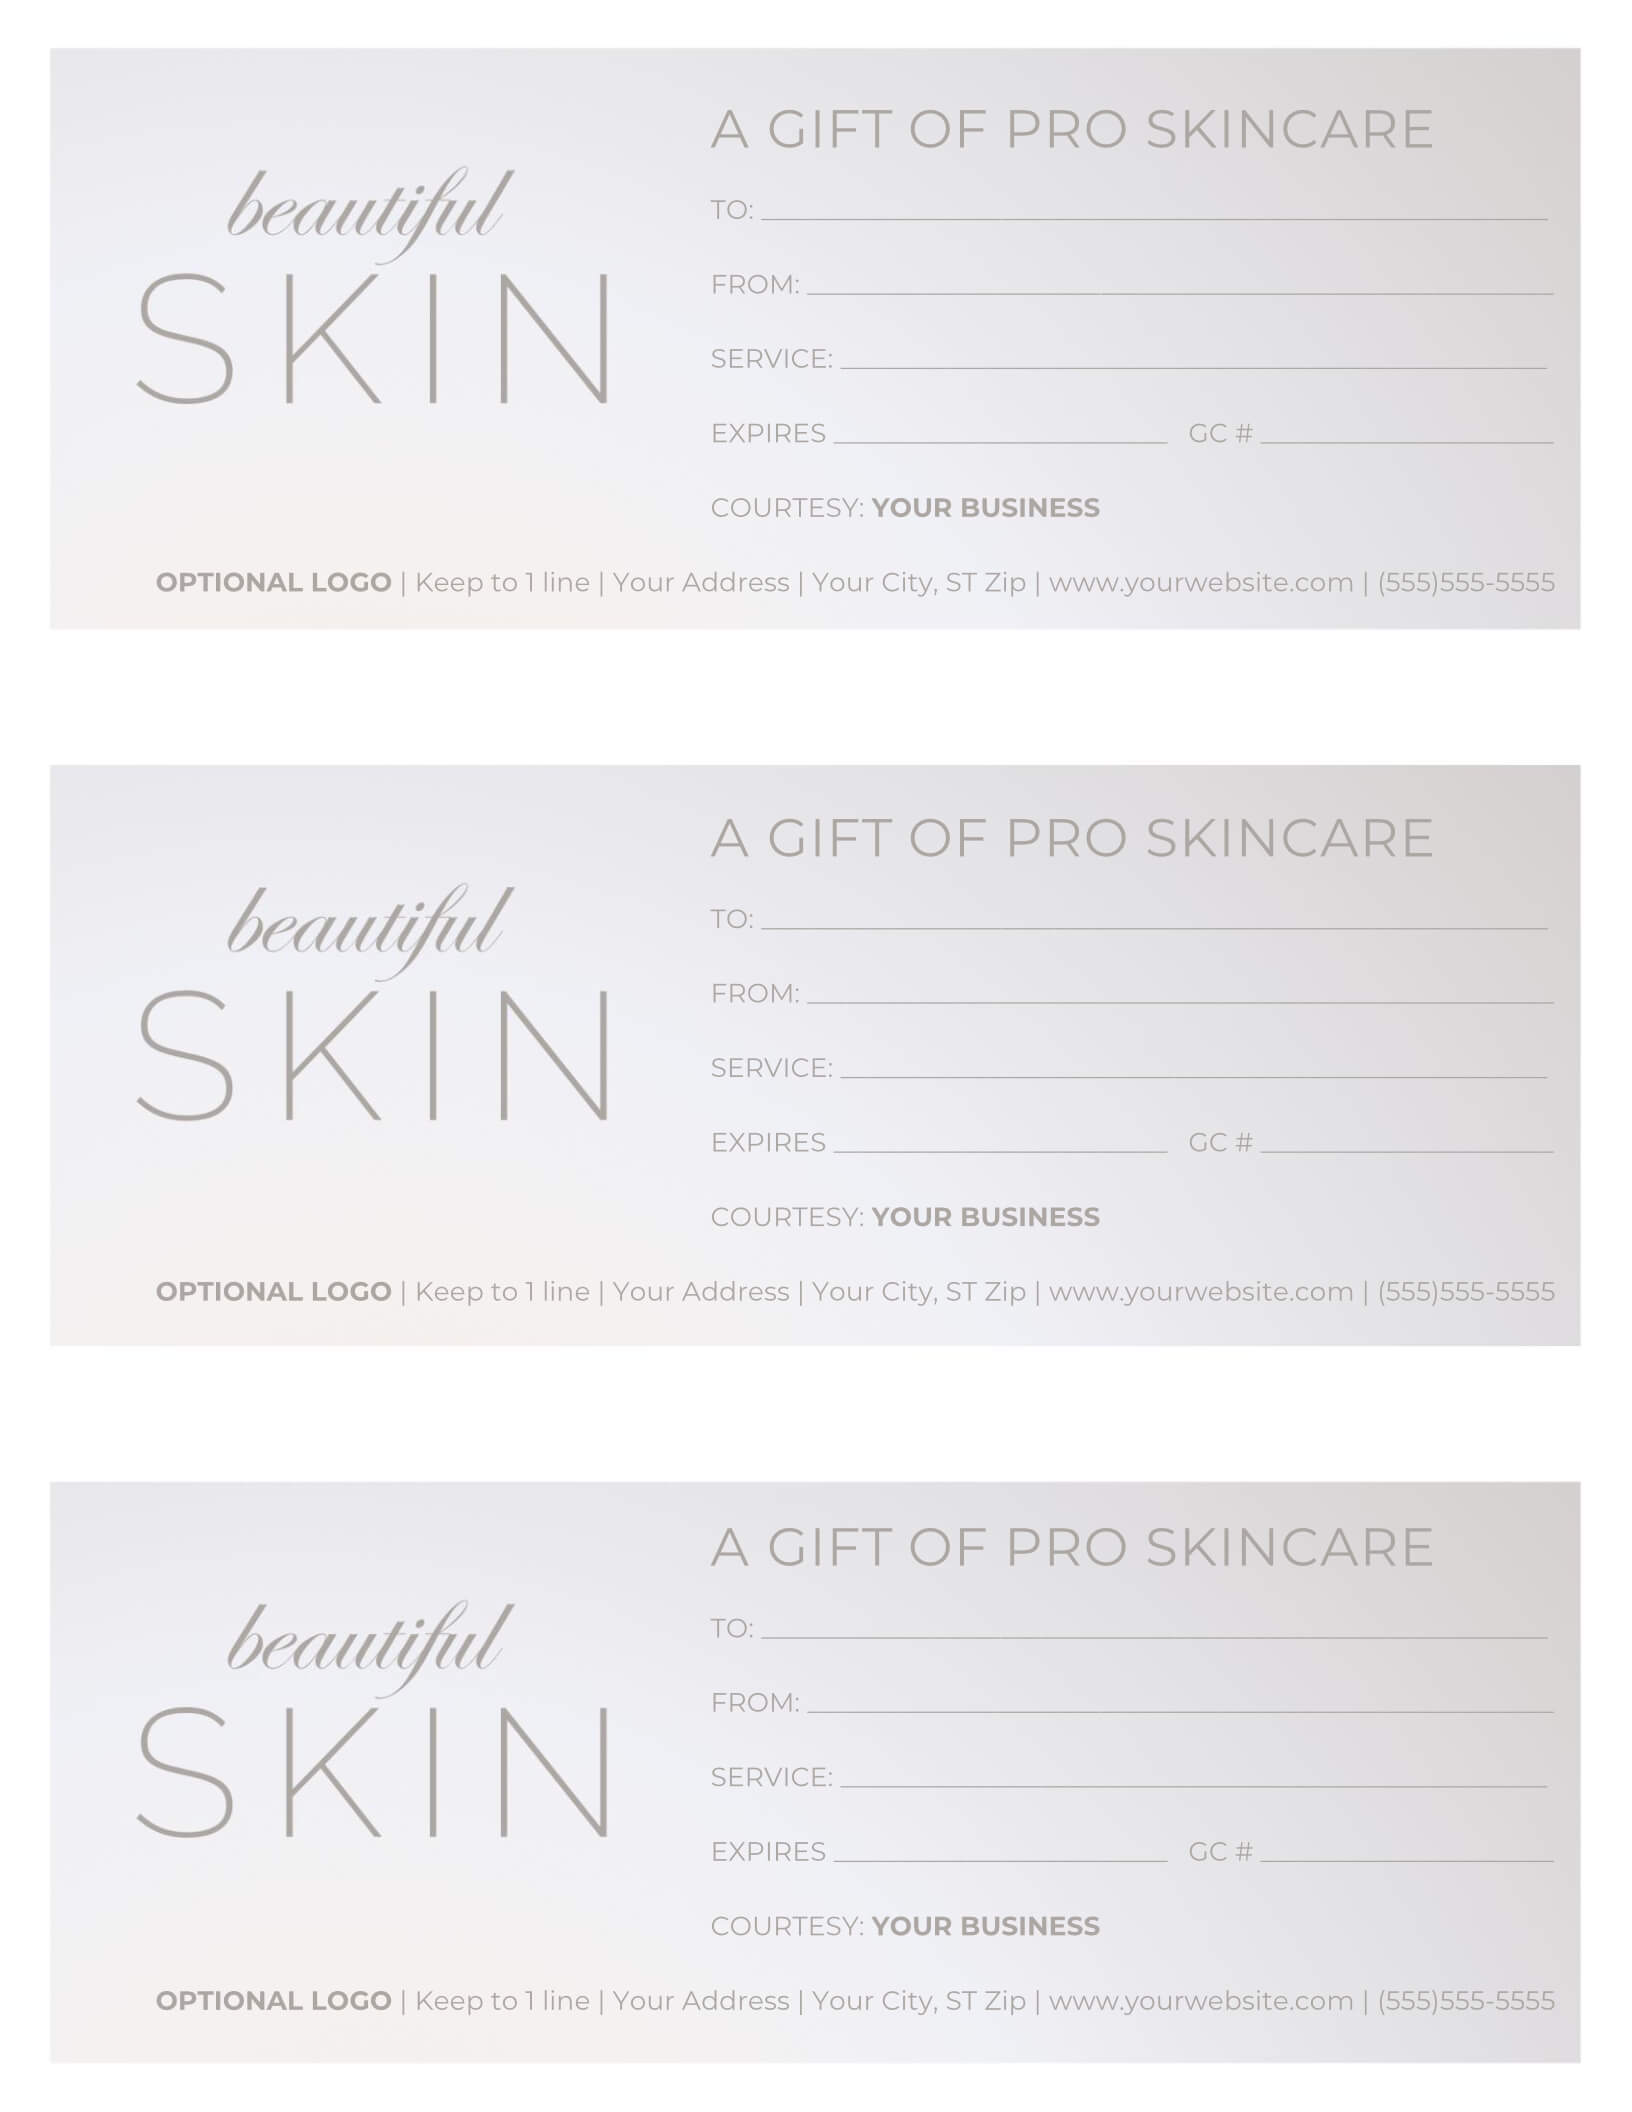 Free Gift Certificate Templates For Massage And Spa In Spa Day Gift Certificate Template